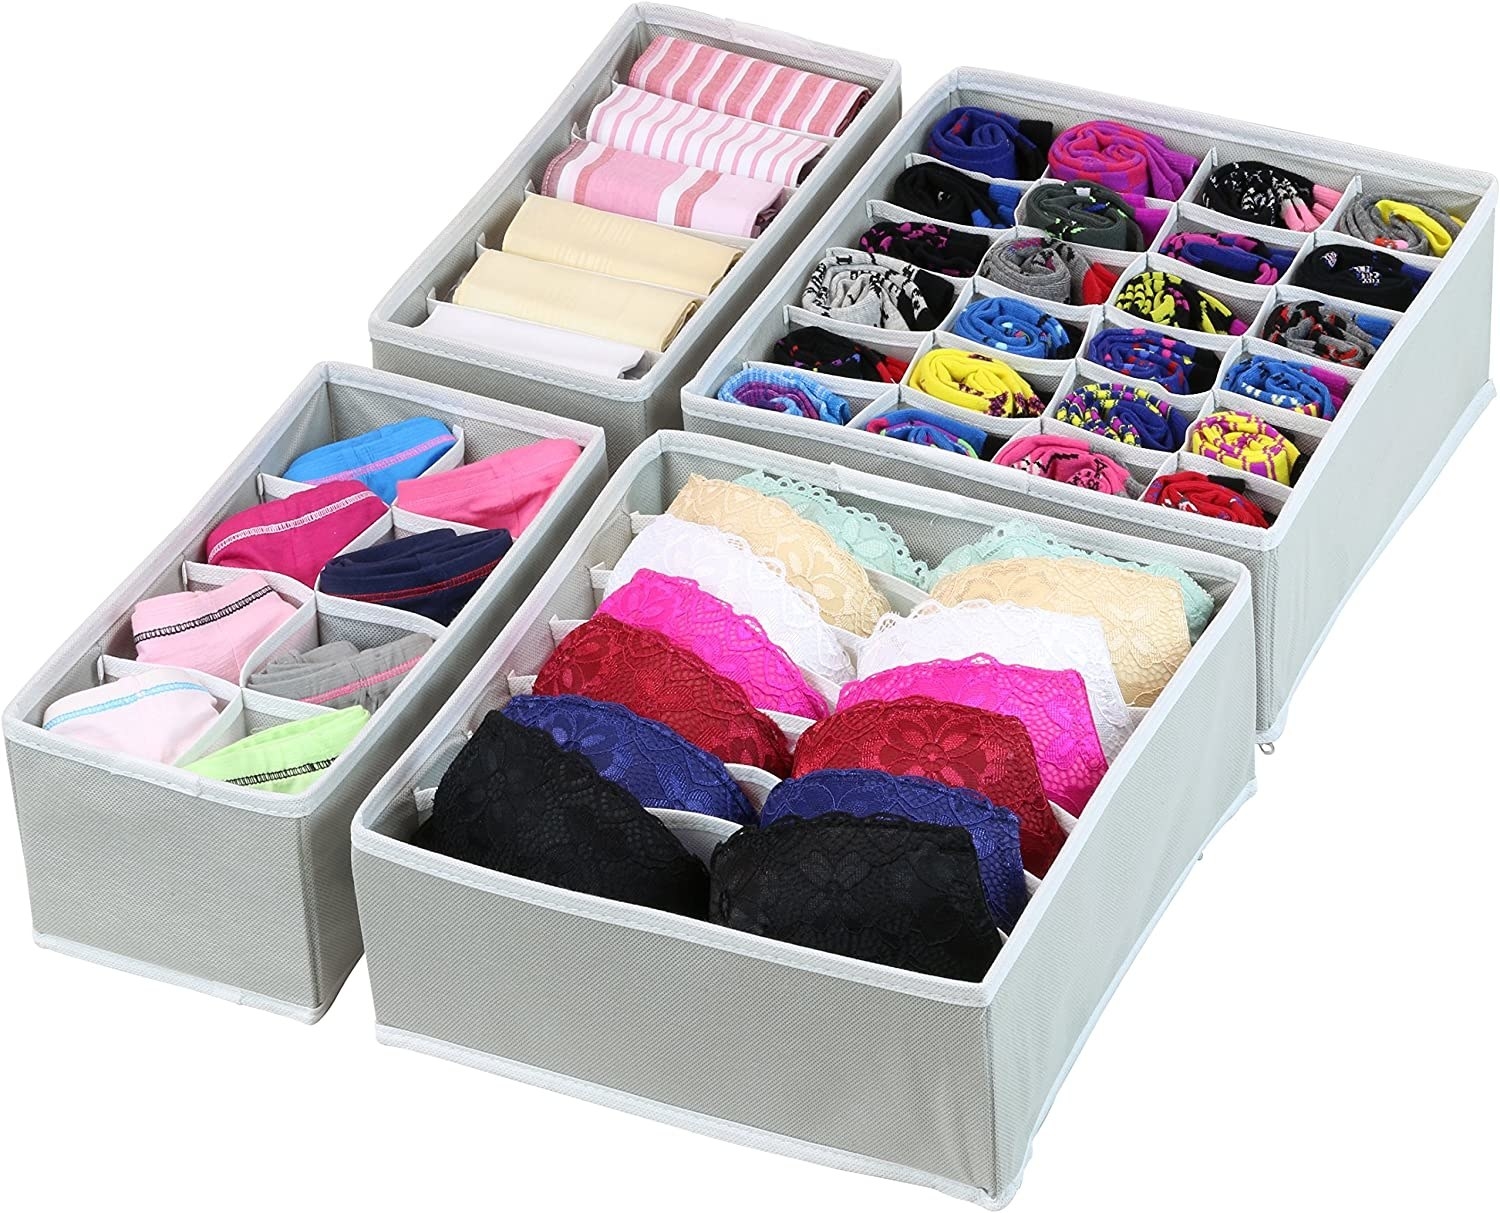 four gray compartmentalized drawer organizers